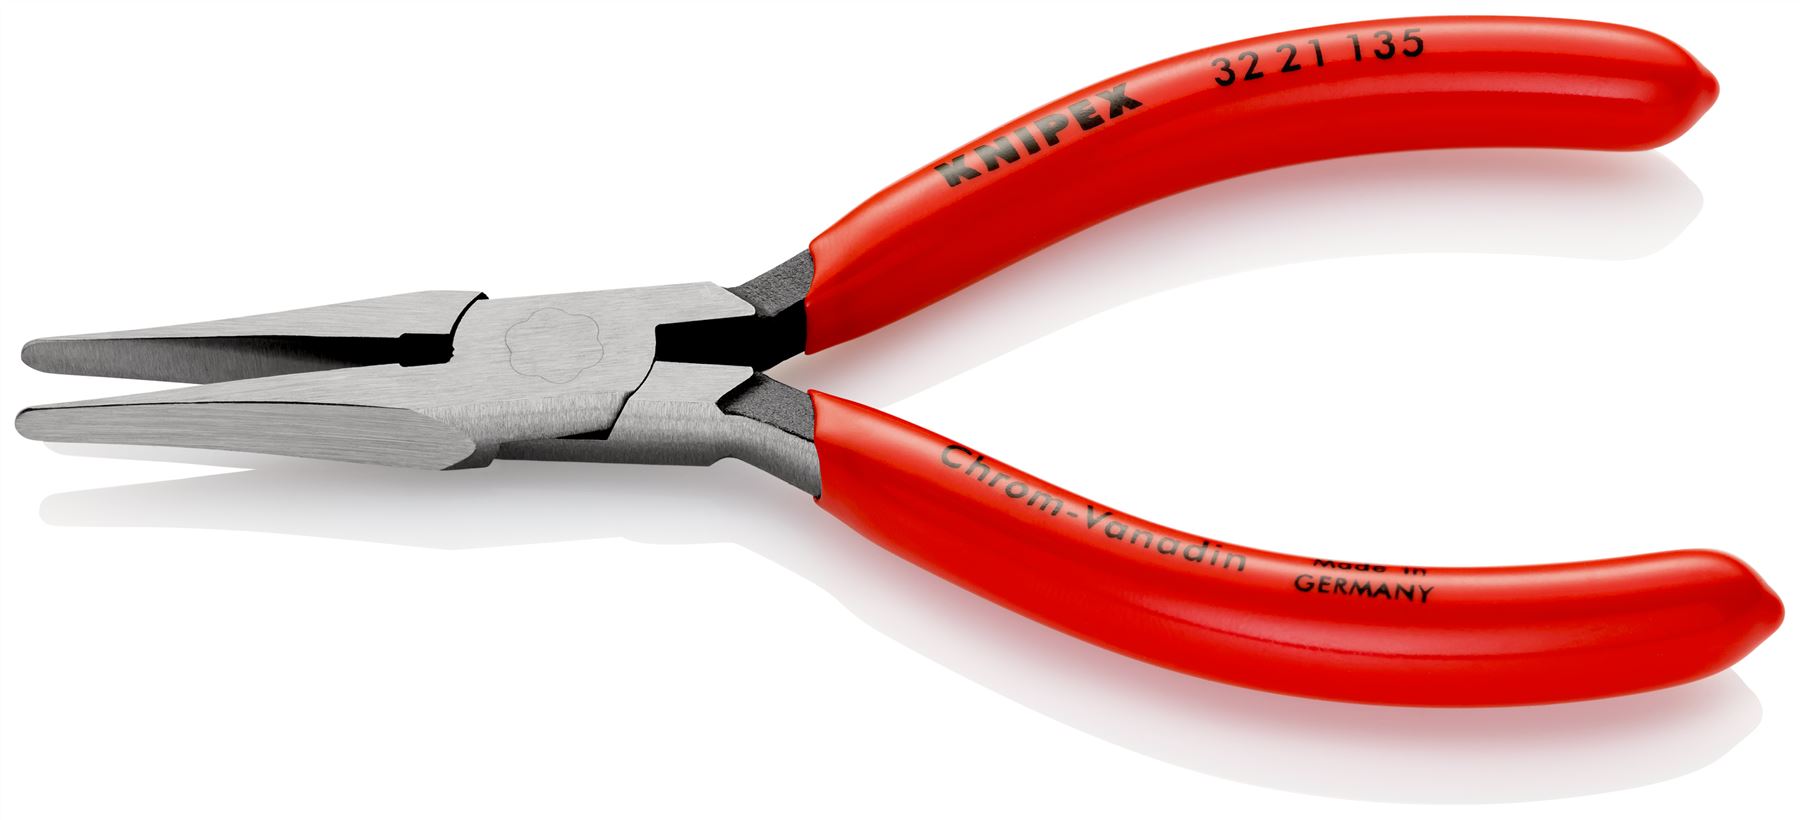 KNIPEX Relay Adjusting Gripping Pliers 135mm Plastic Coated 32 21 135